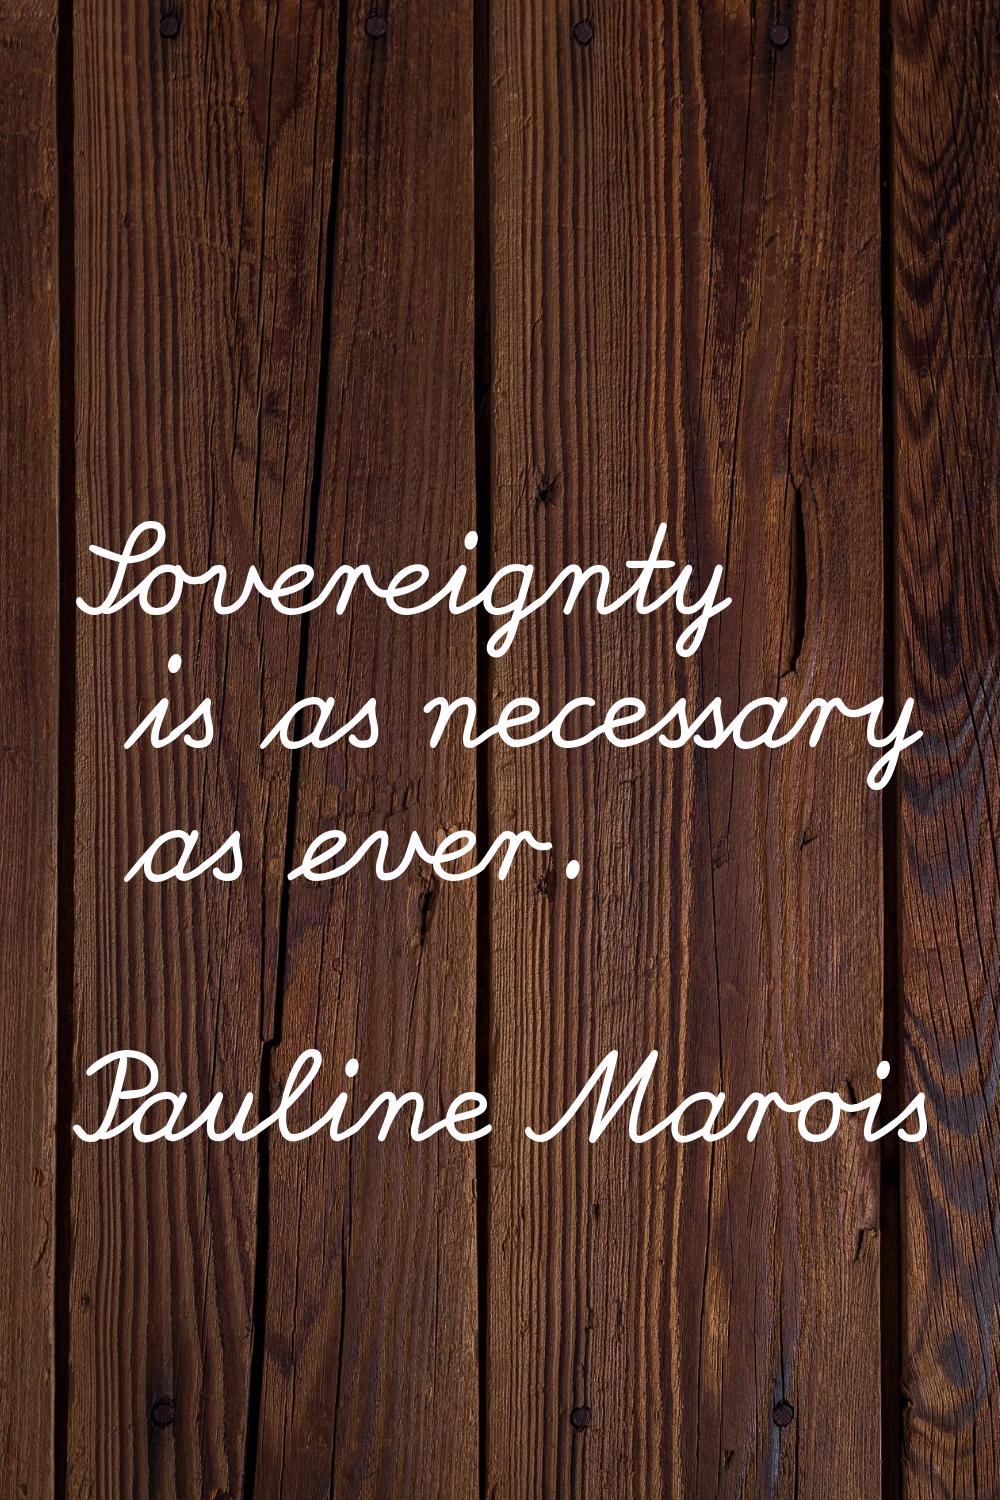 Sovereignty is as necessary as ever.